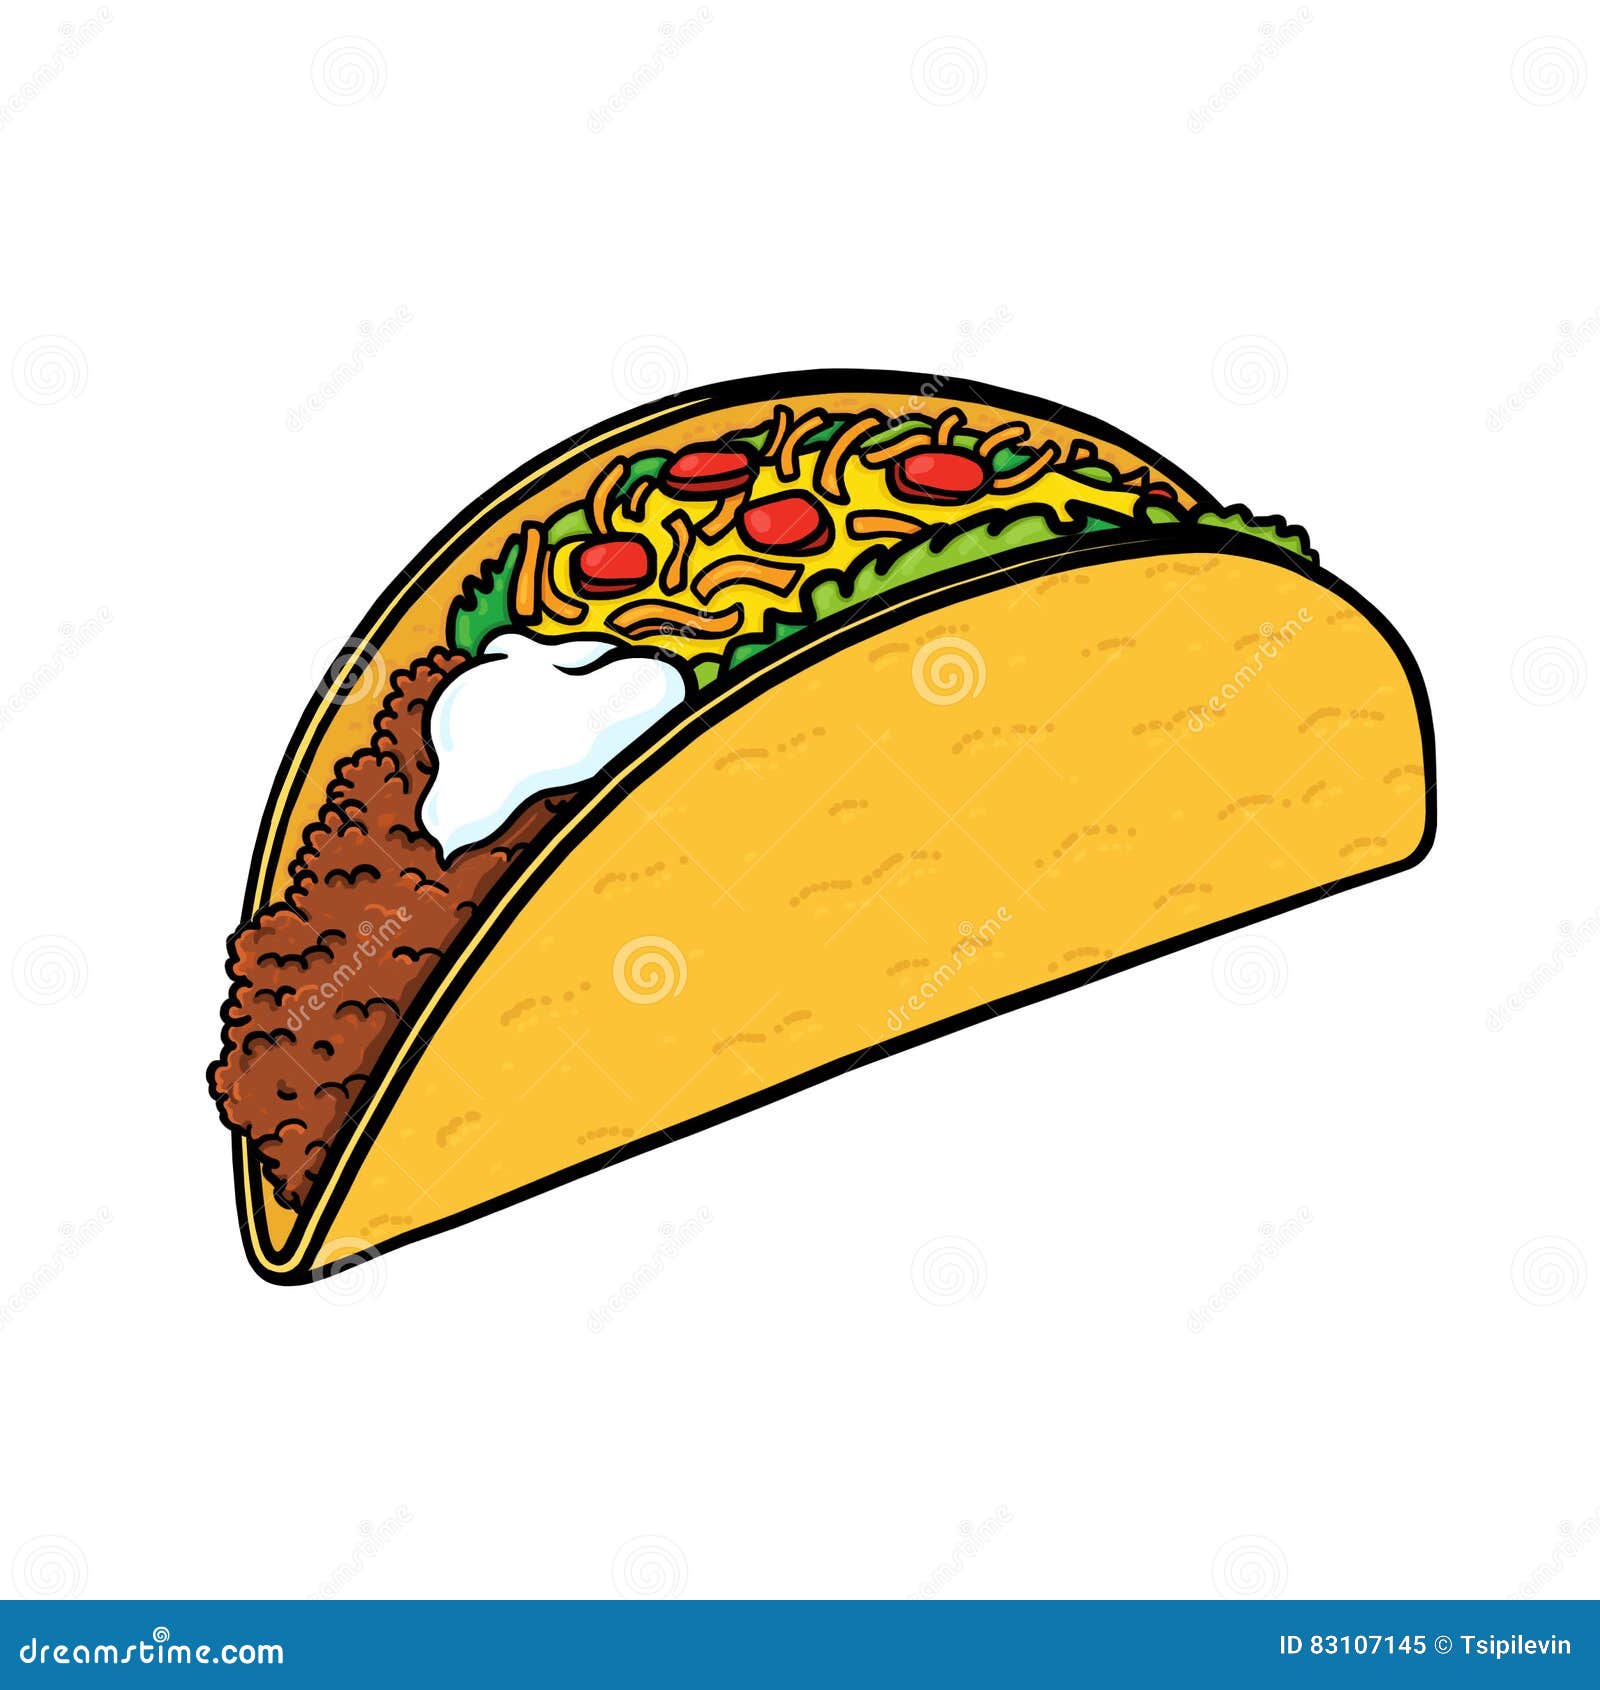 Sketch Taco Vector Images over 2000